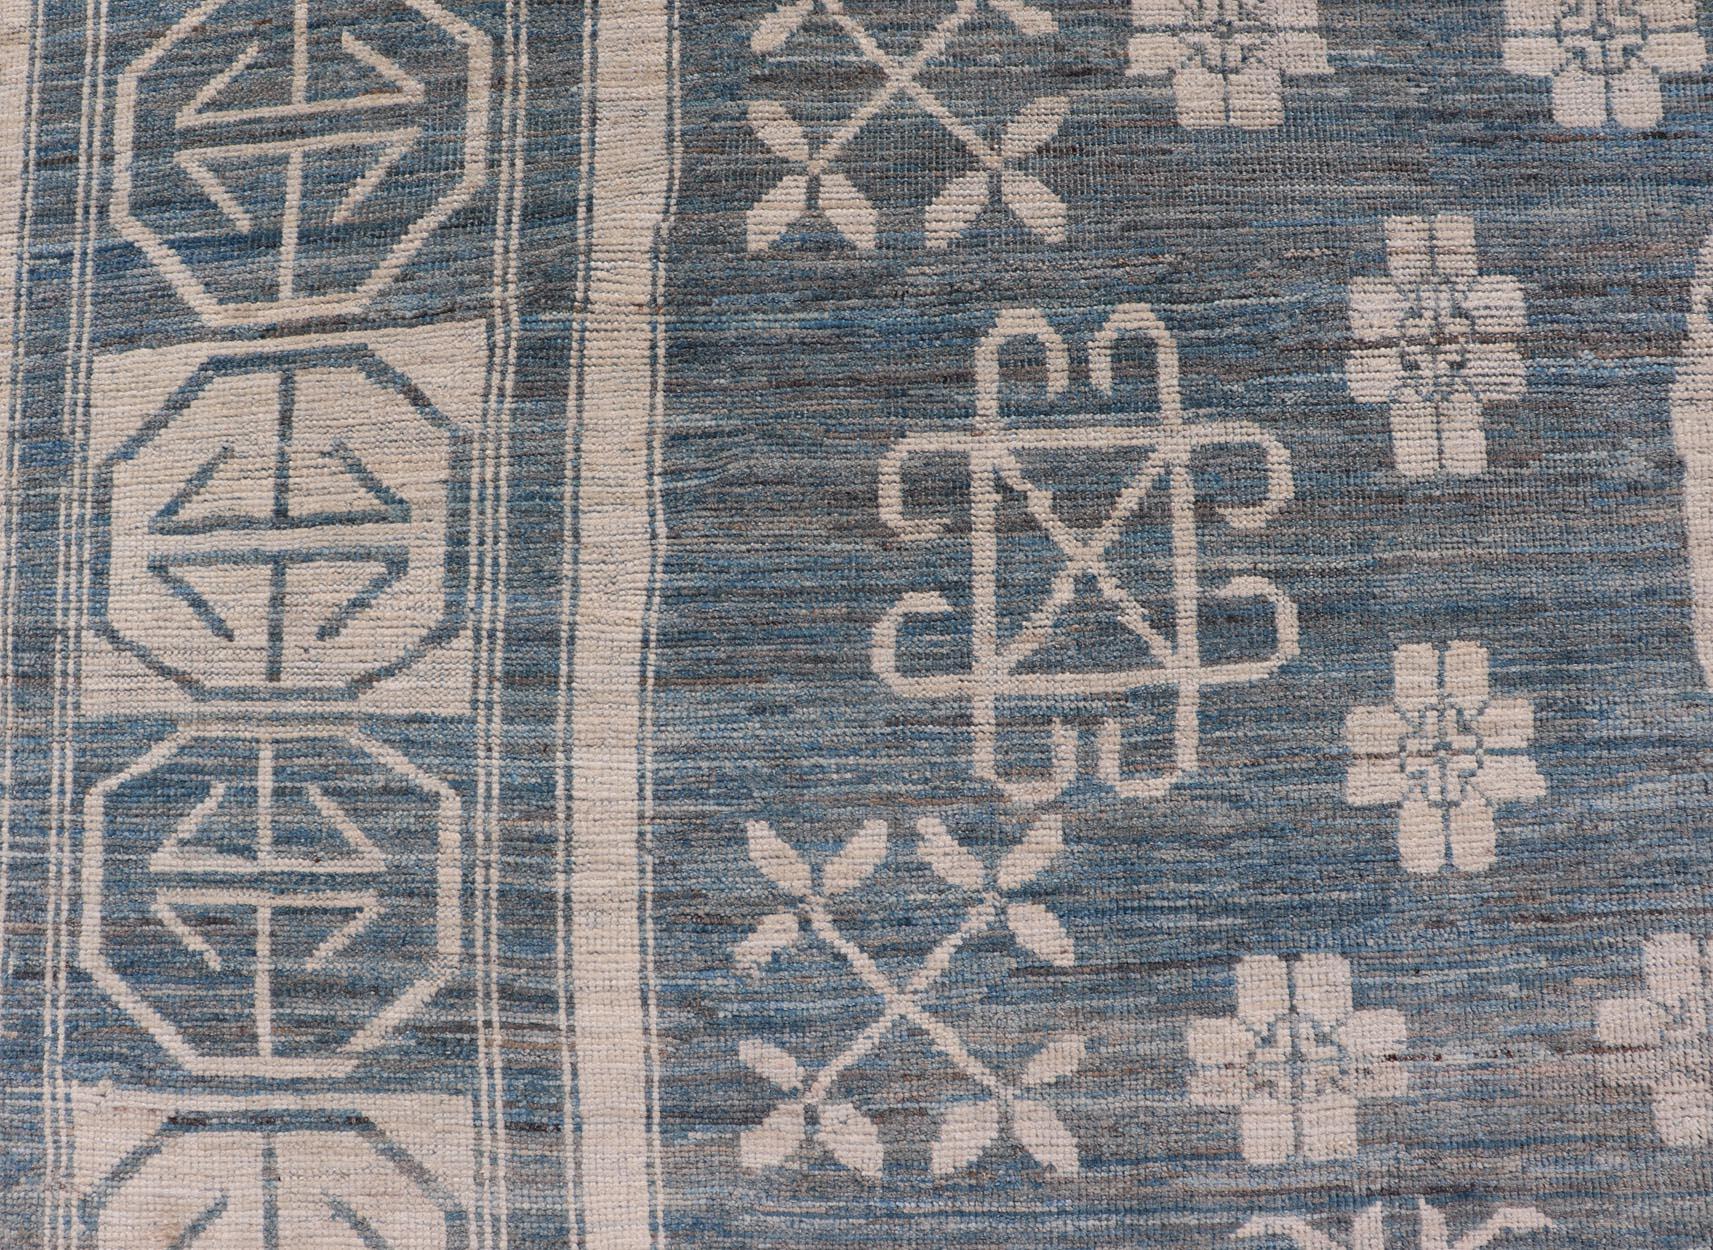 Modern Khotan Rug with Circular Medallions in Shades of Steel Blue & off White In New Condition For Sale In Atlanta, GA